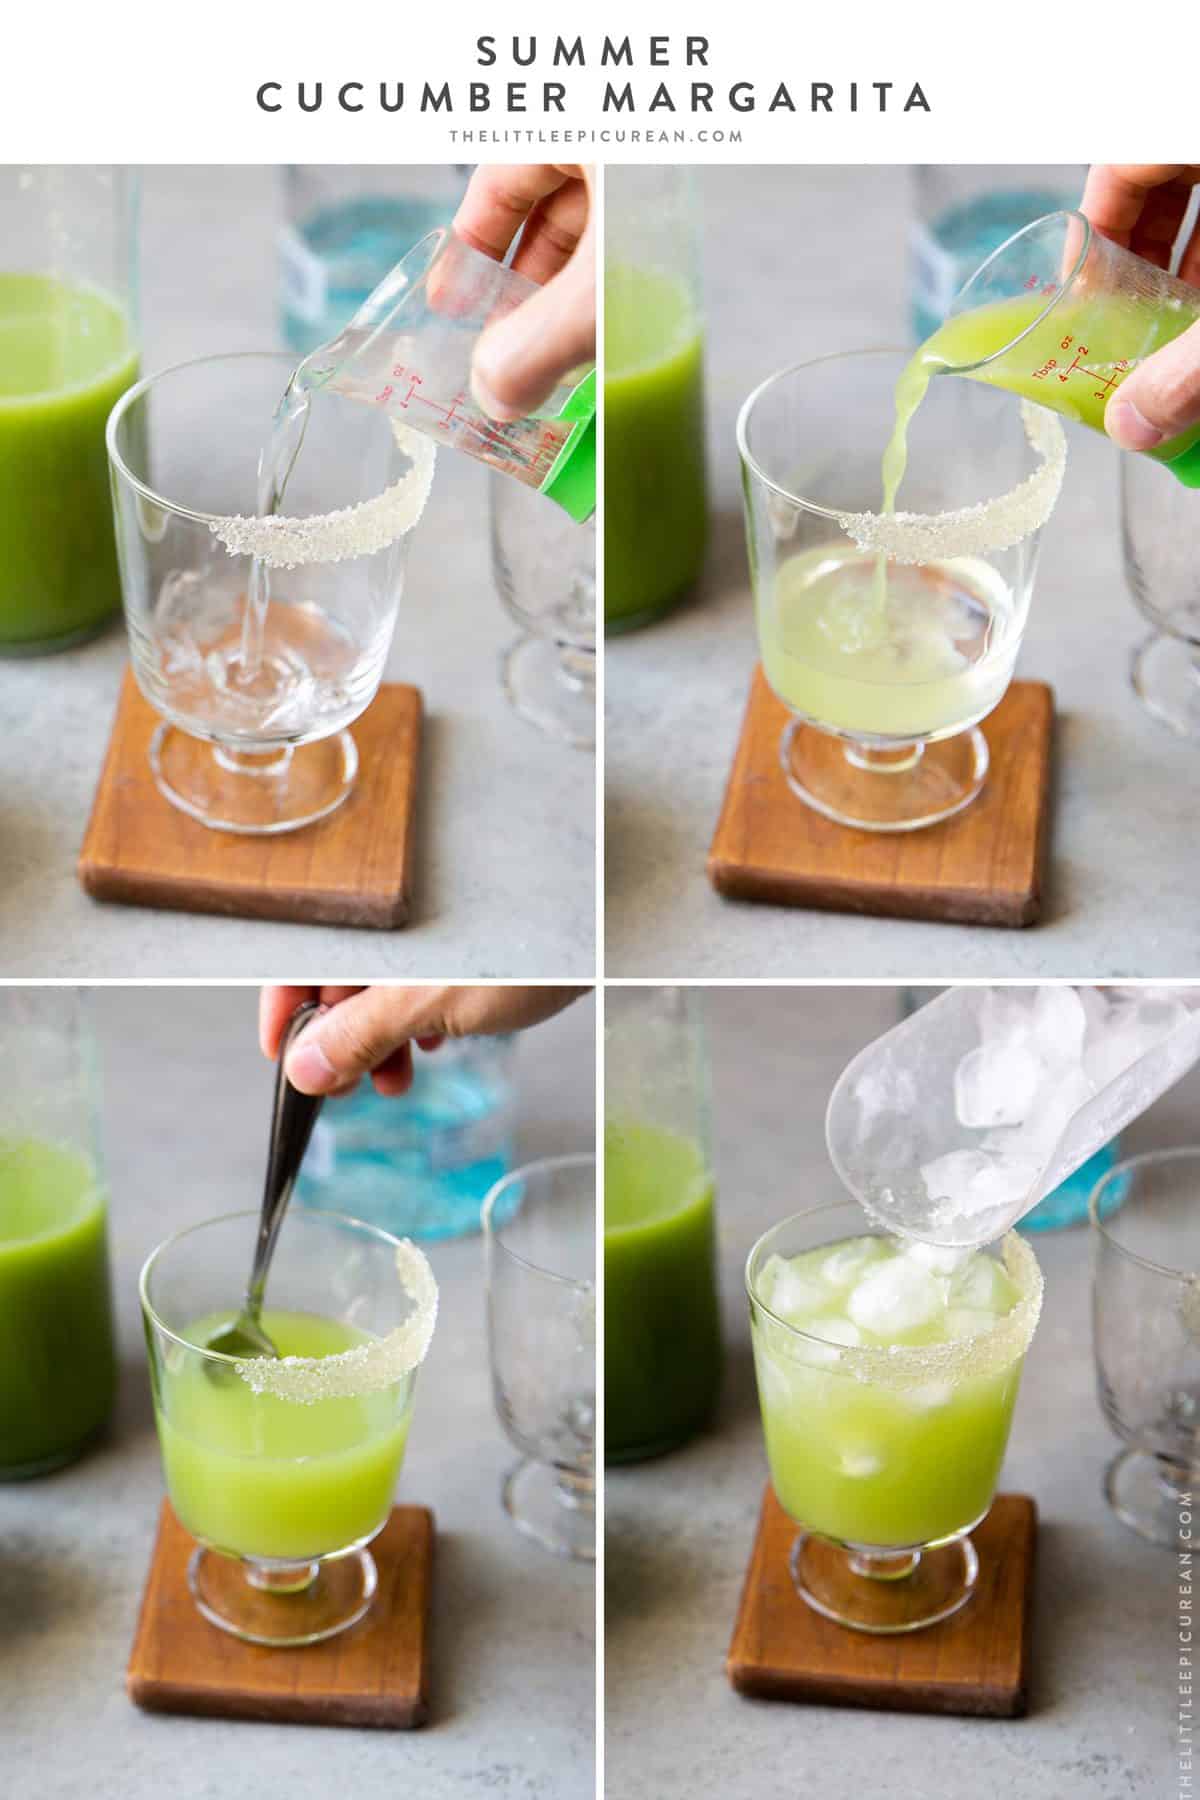 step by step images for how to make cucumber margarita from scratch